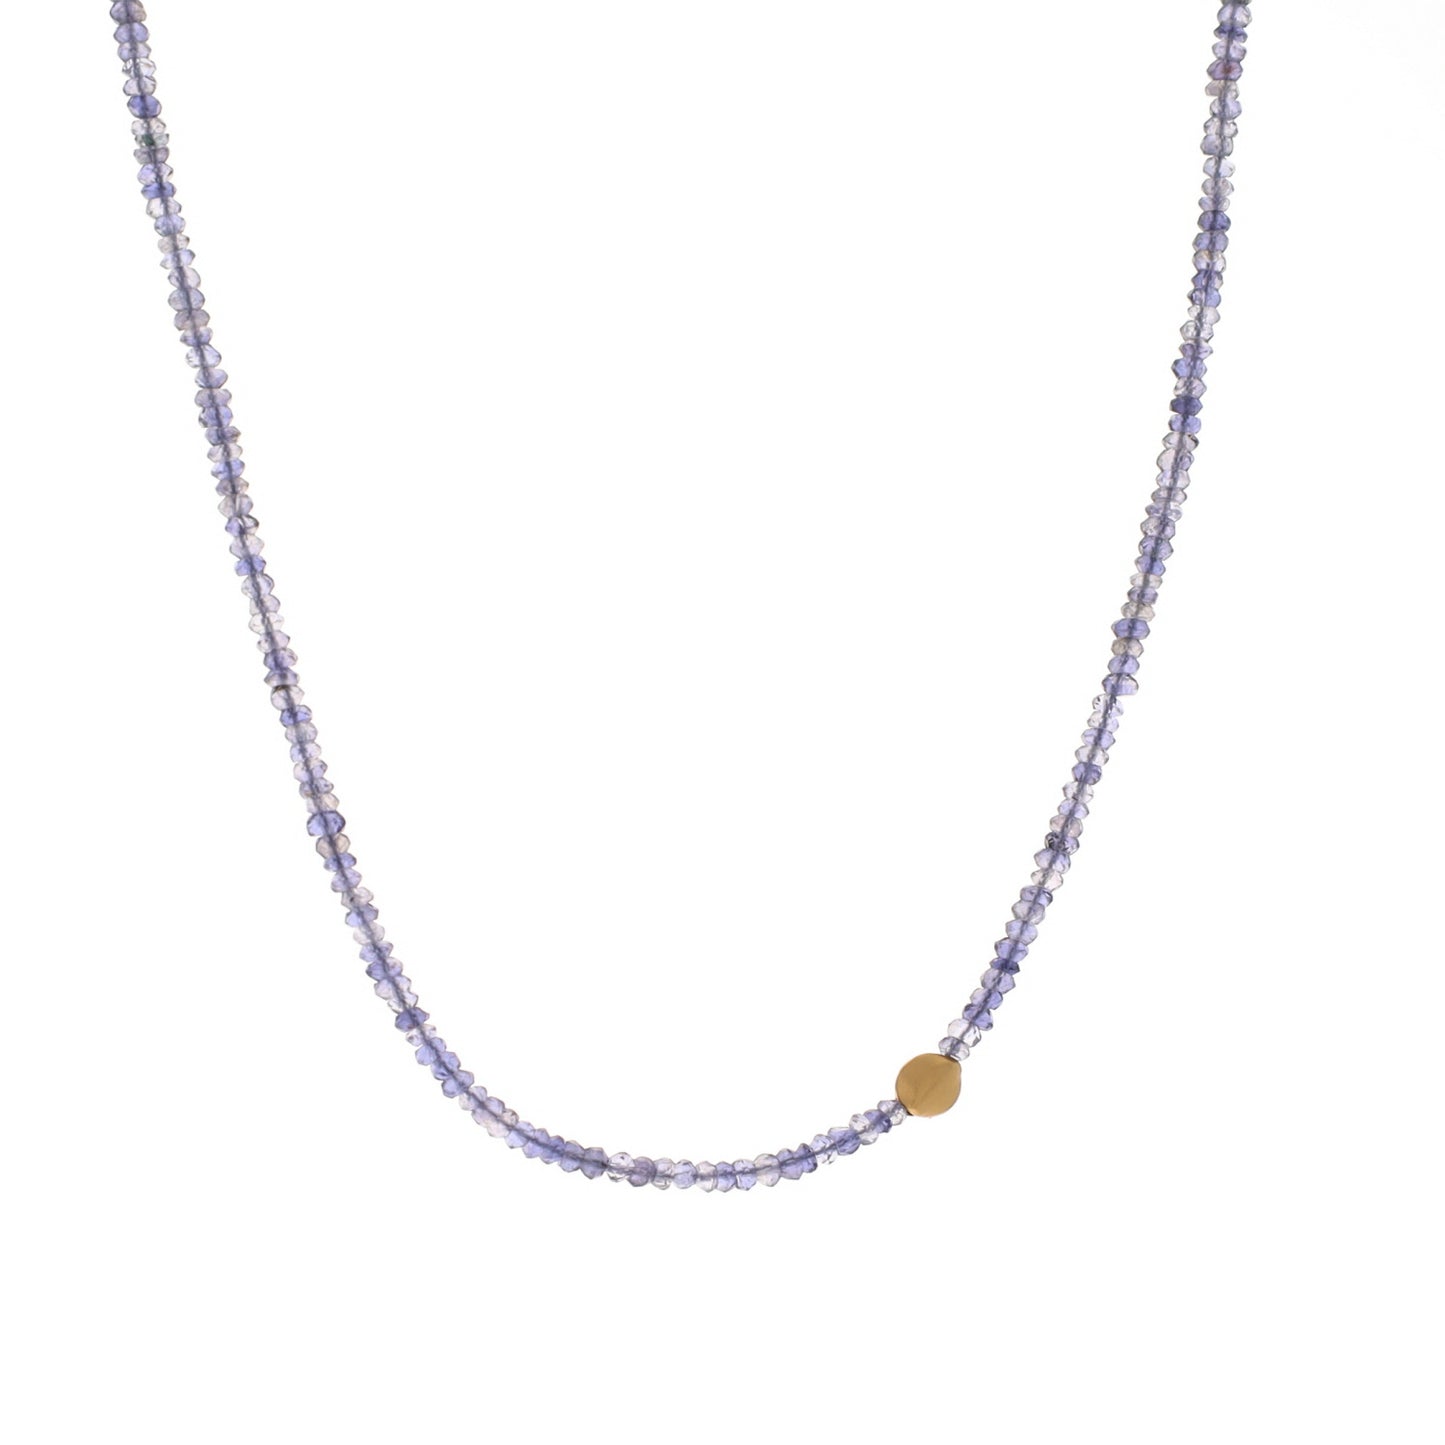 Tanzanite with Satin Gold Bead Necklace